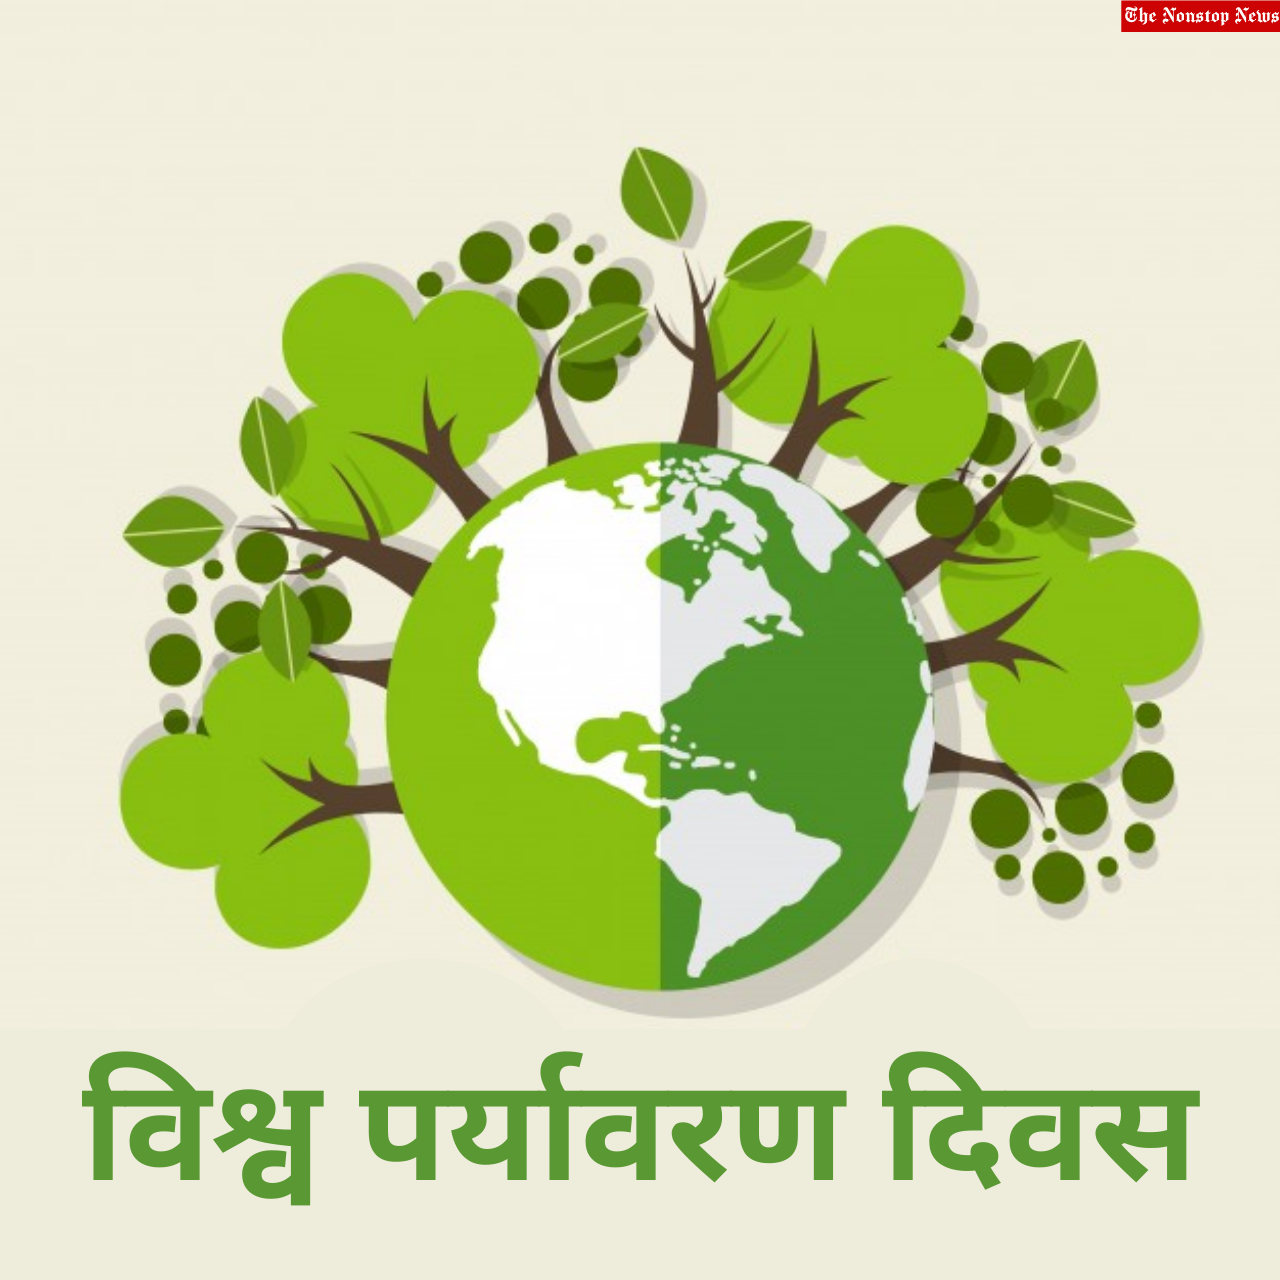 World Environment Day 2021: Hindi Quotes, Wishes, Status, Greetings, and Messages to Share